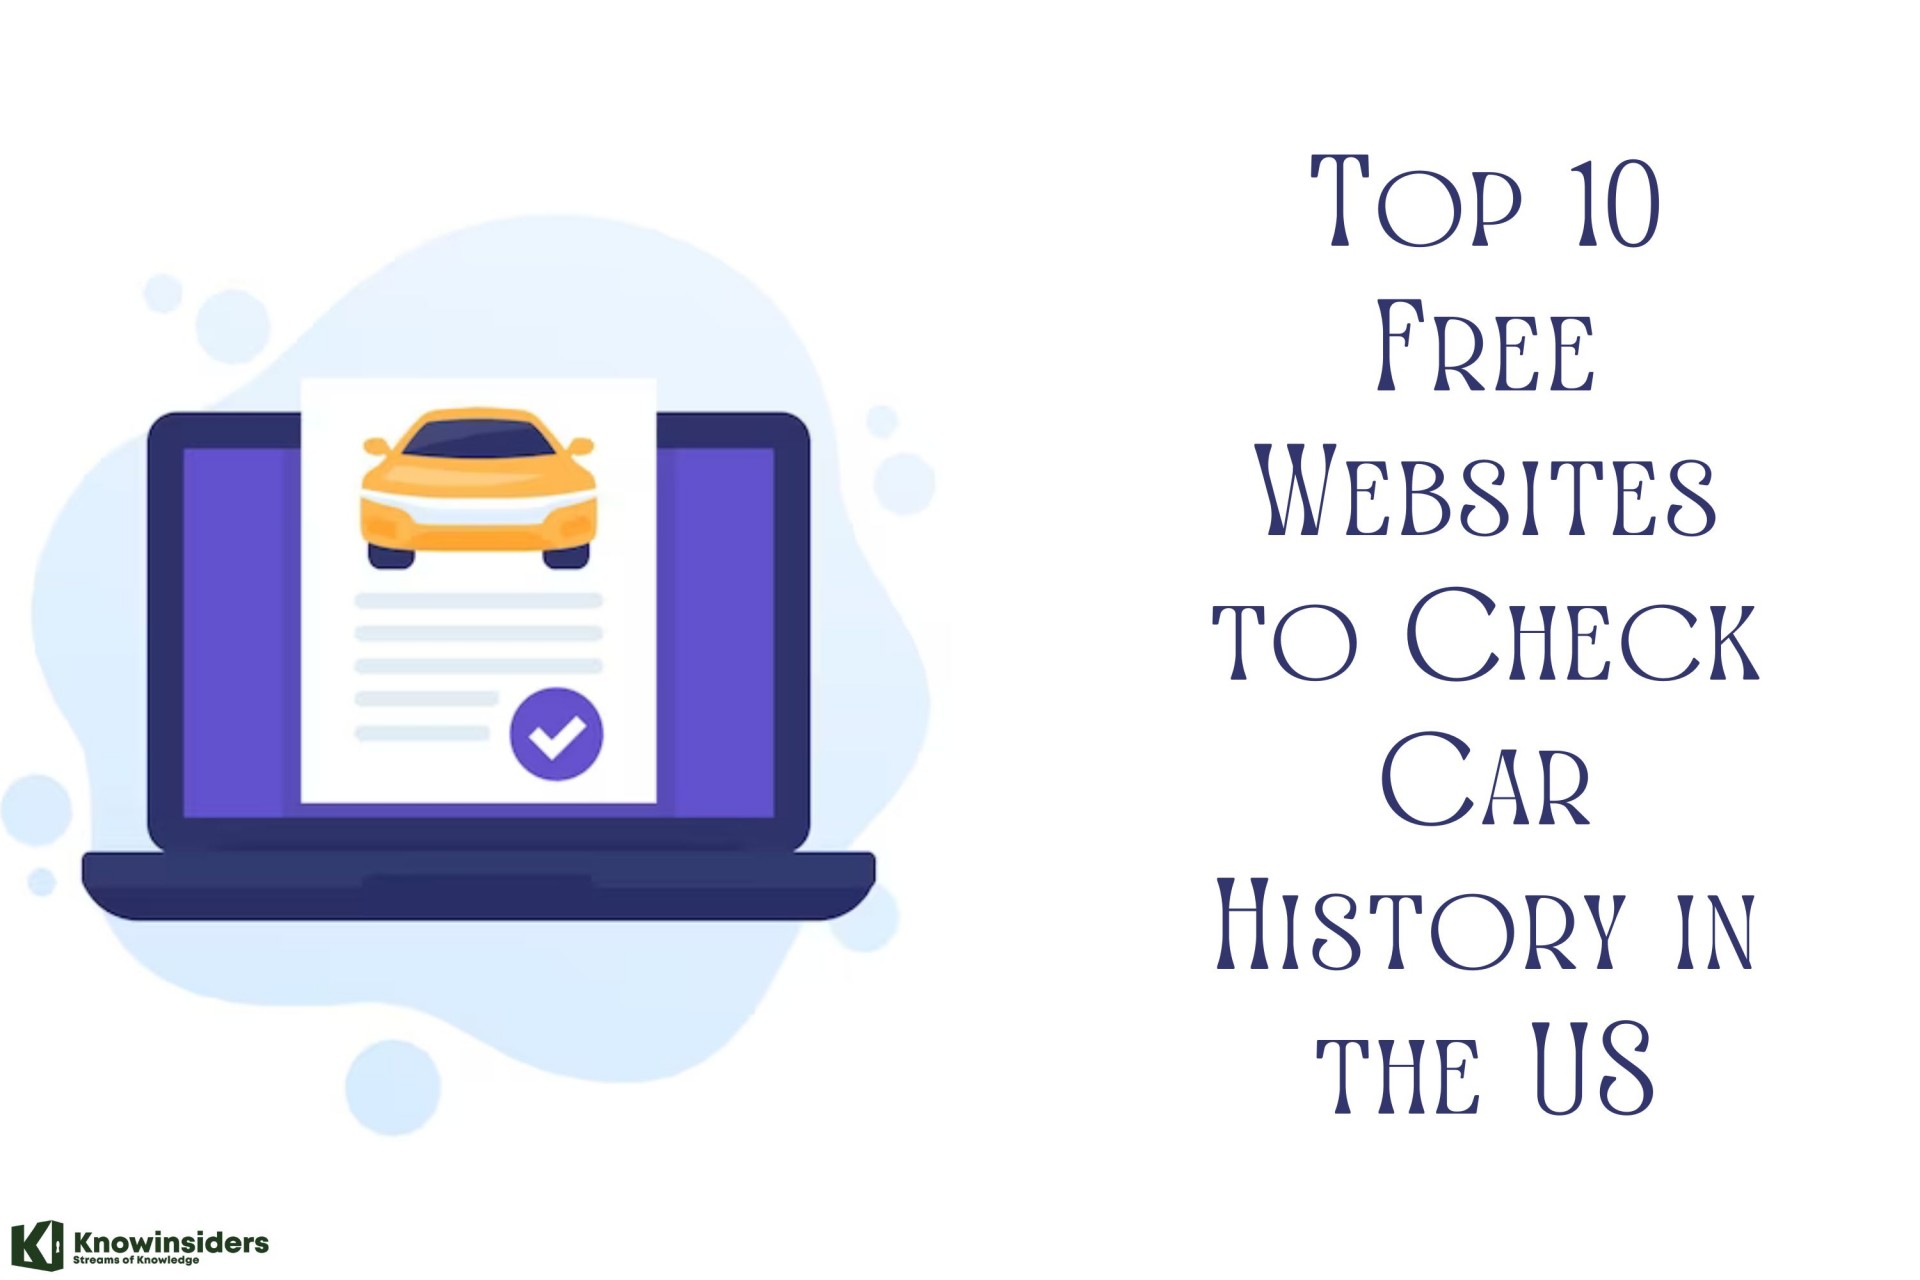 How to Check A Car History in the US - 10 Best Free Sites to Find the VIN